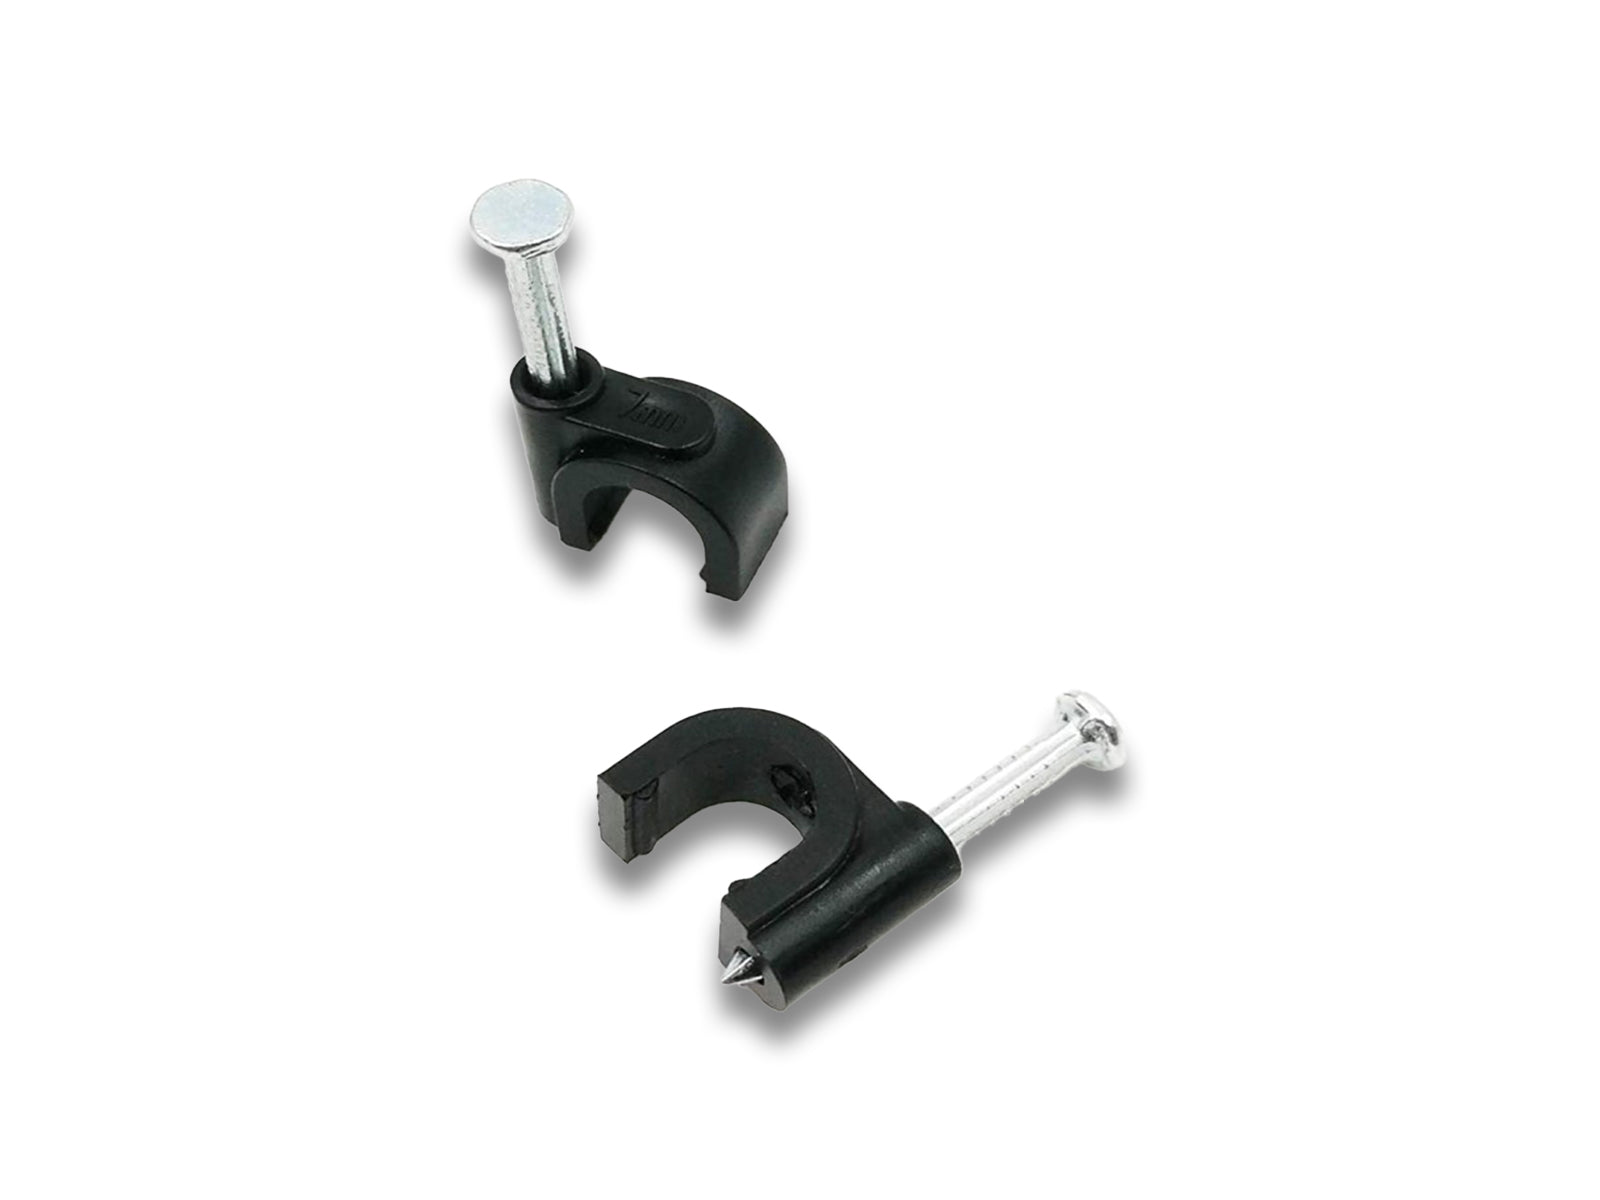 Cable Clips With Nail In Black Standing And Flat View